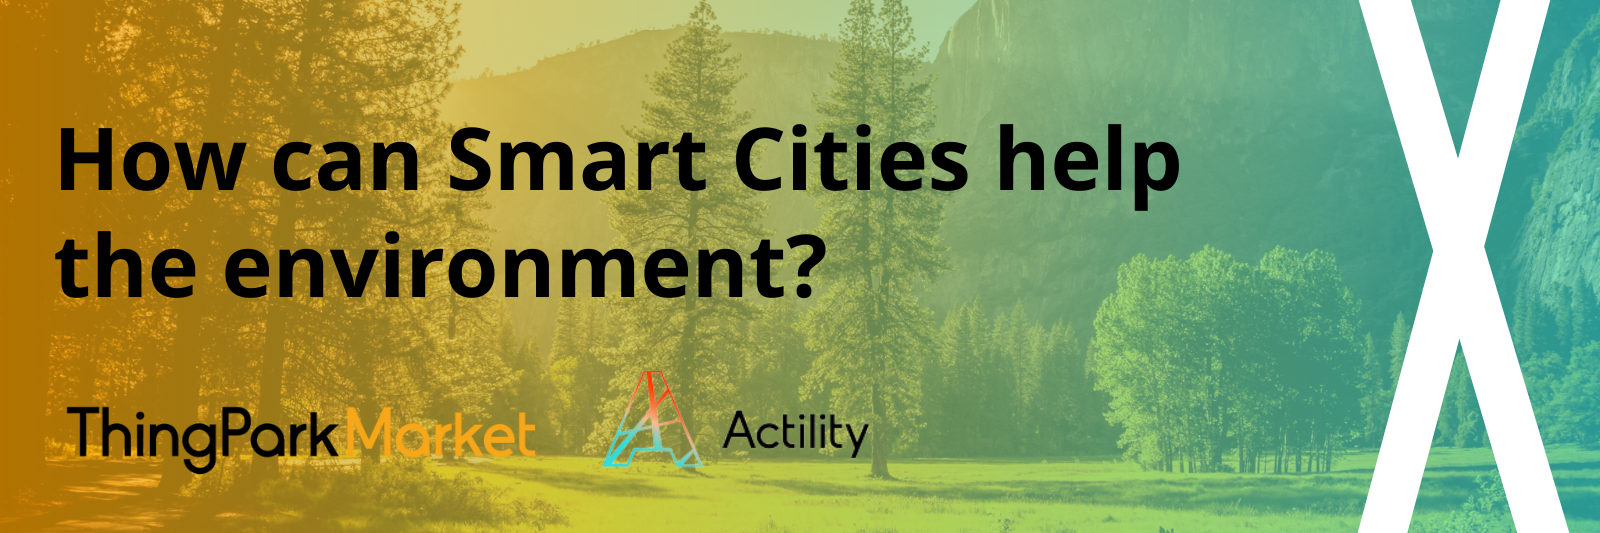 How can Smart Cities help the environment?